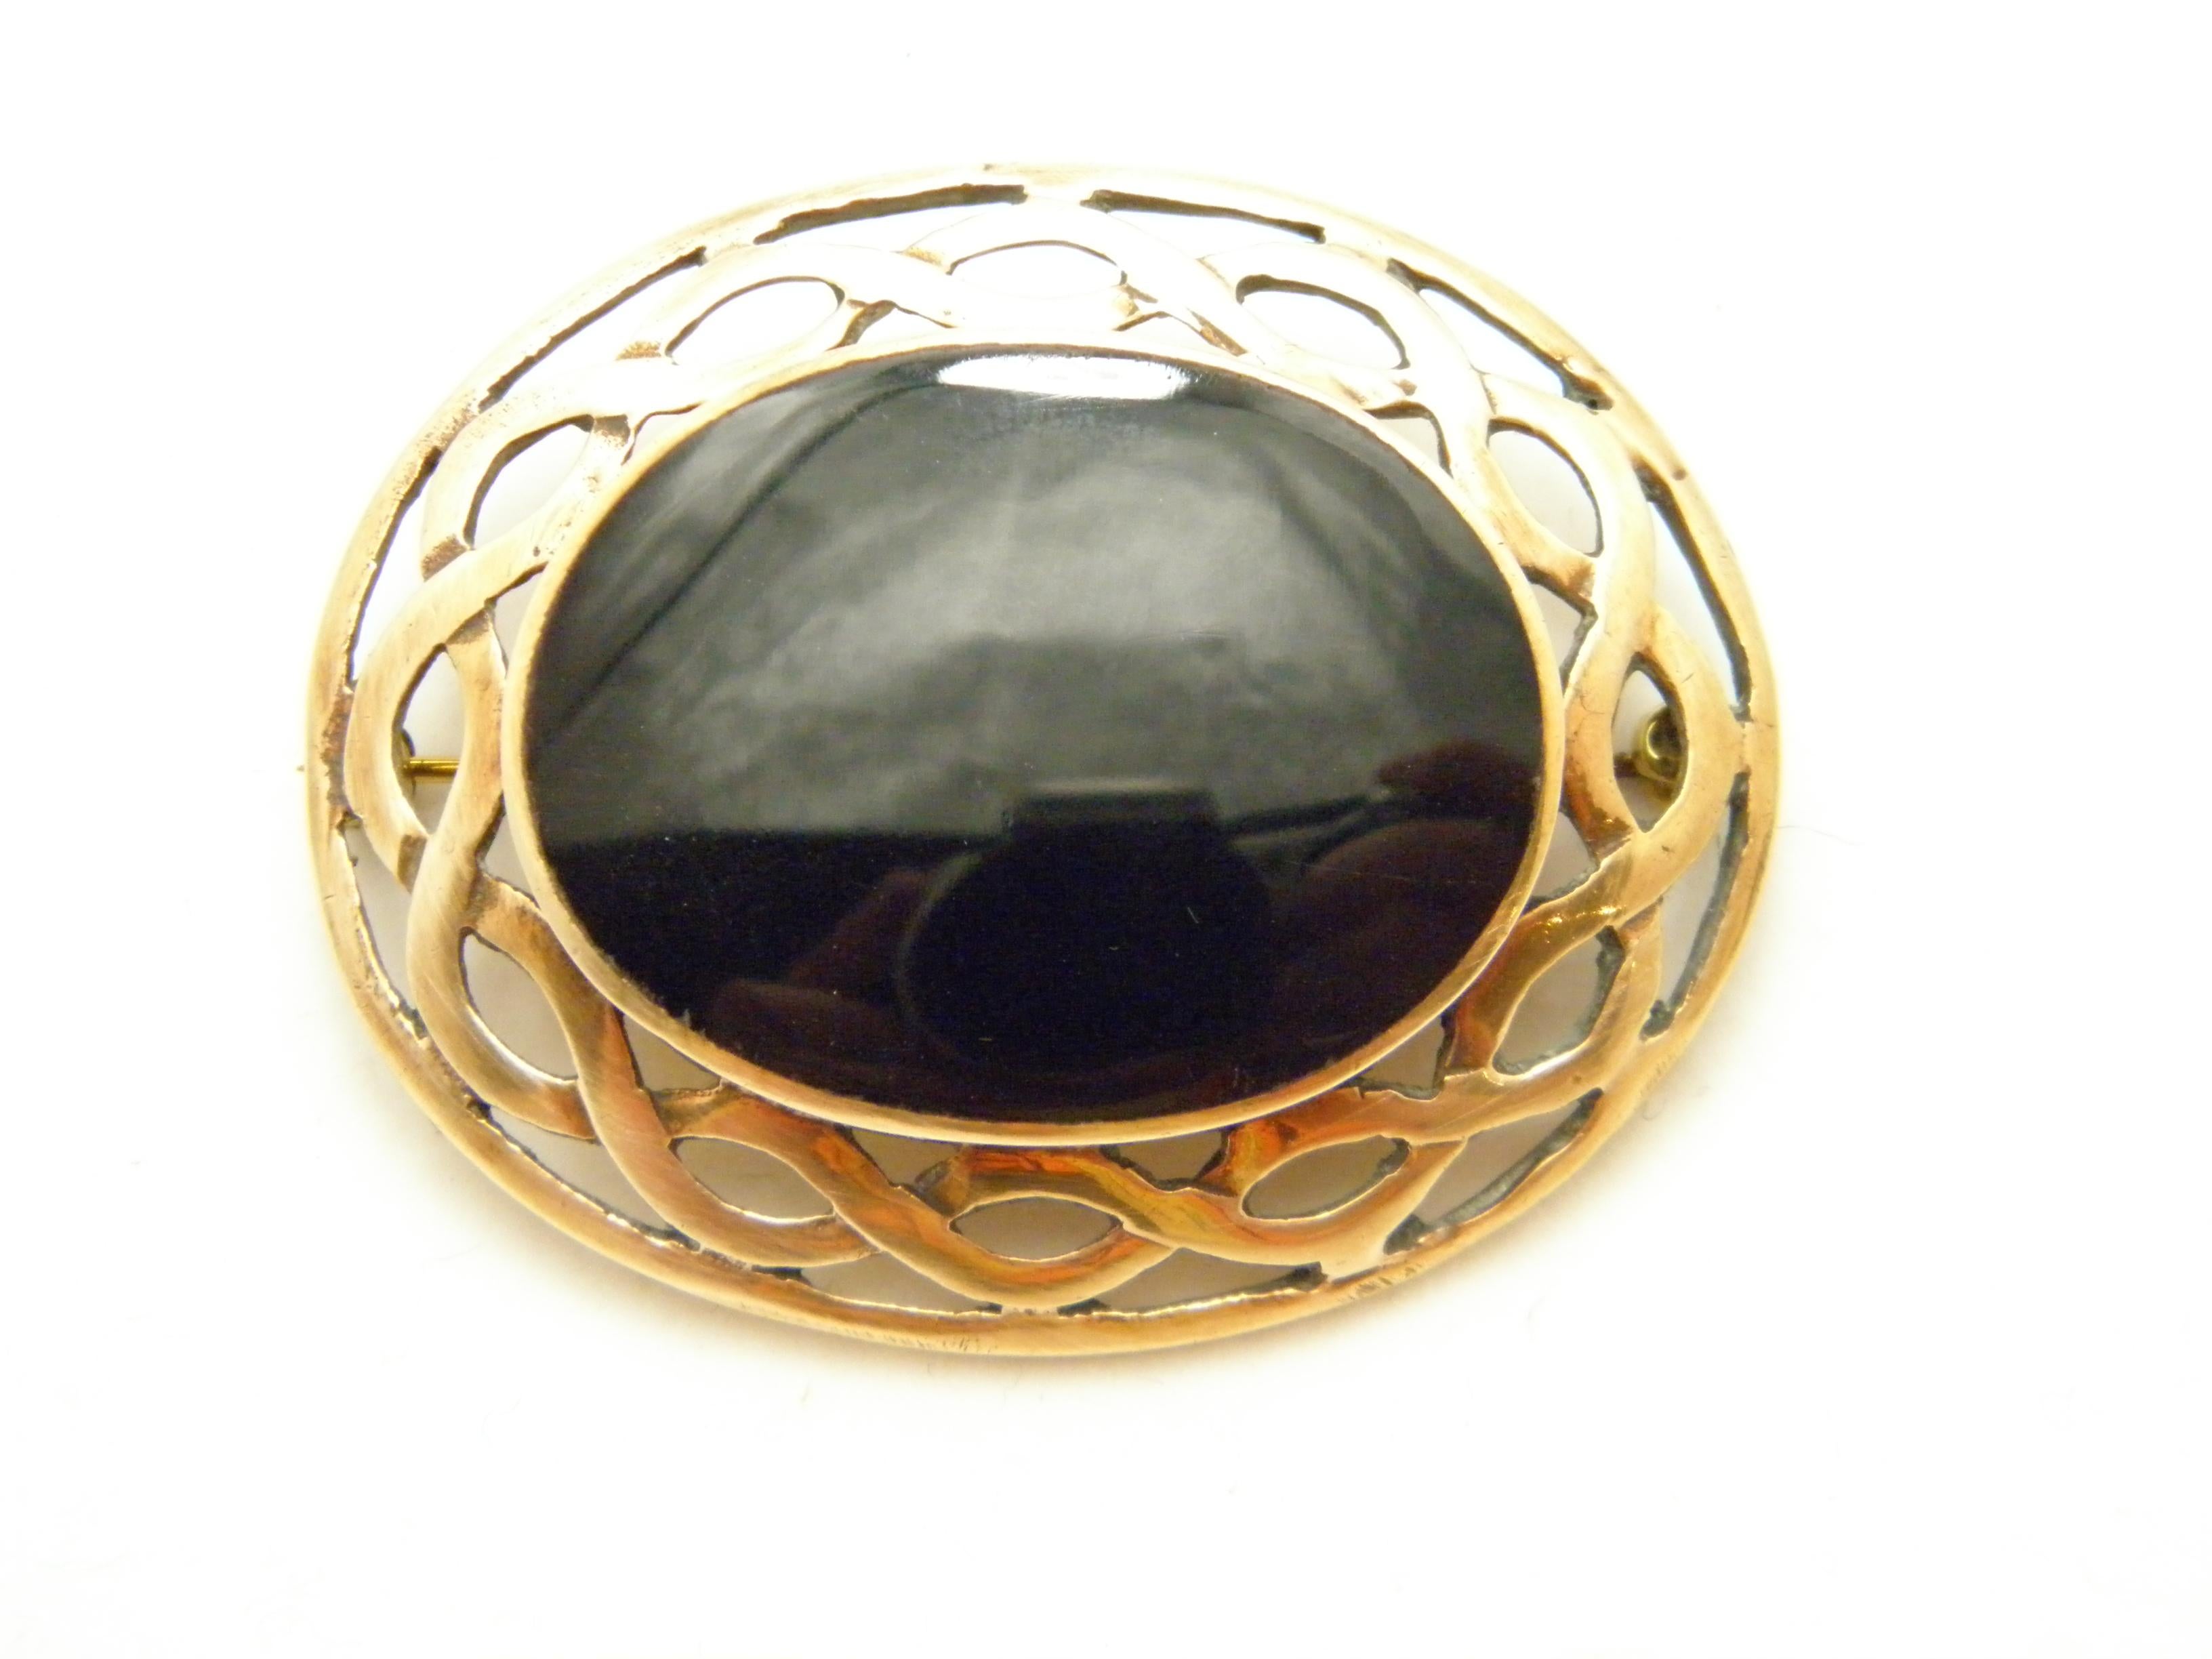 If you have landed on this page then you have an eye for beauty.

On offer is this gorgeous

9CT HEAVY ROSE GOLD ONYX CELTIC MOURNING BROOCH

DETAILS
Material: 9ct (375/000) Solid Yellow Rose Gold (typical colour of the era)
Style: Victorian classic